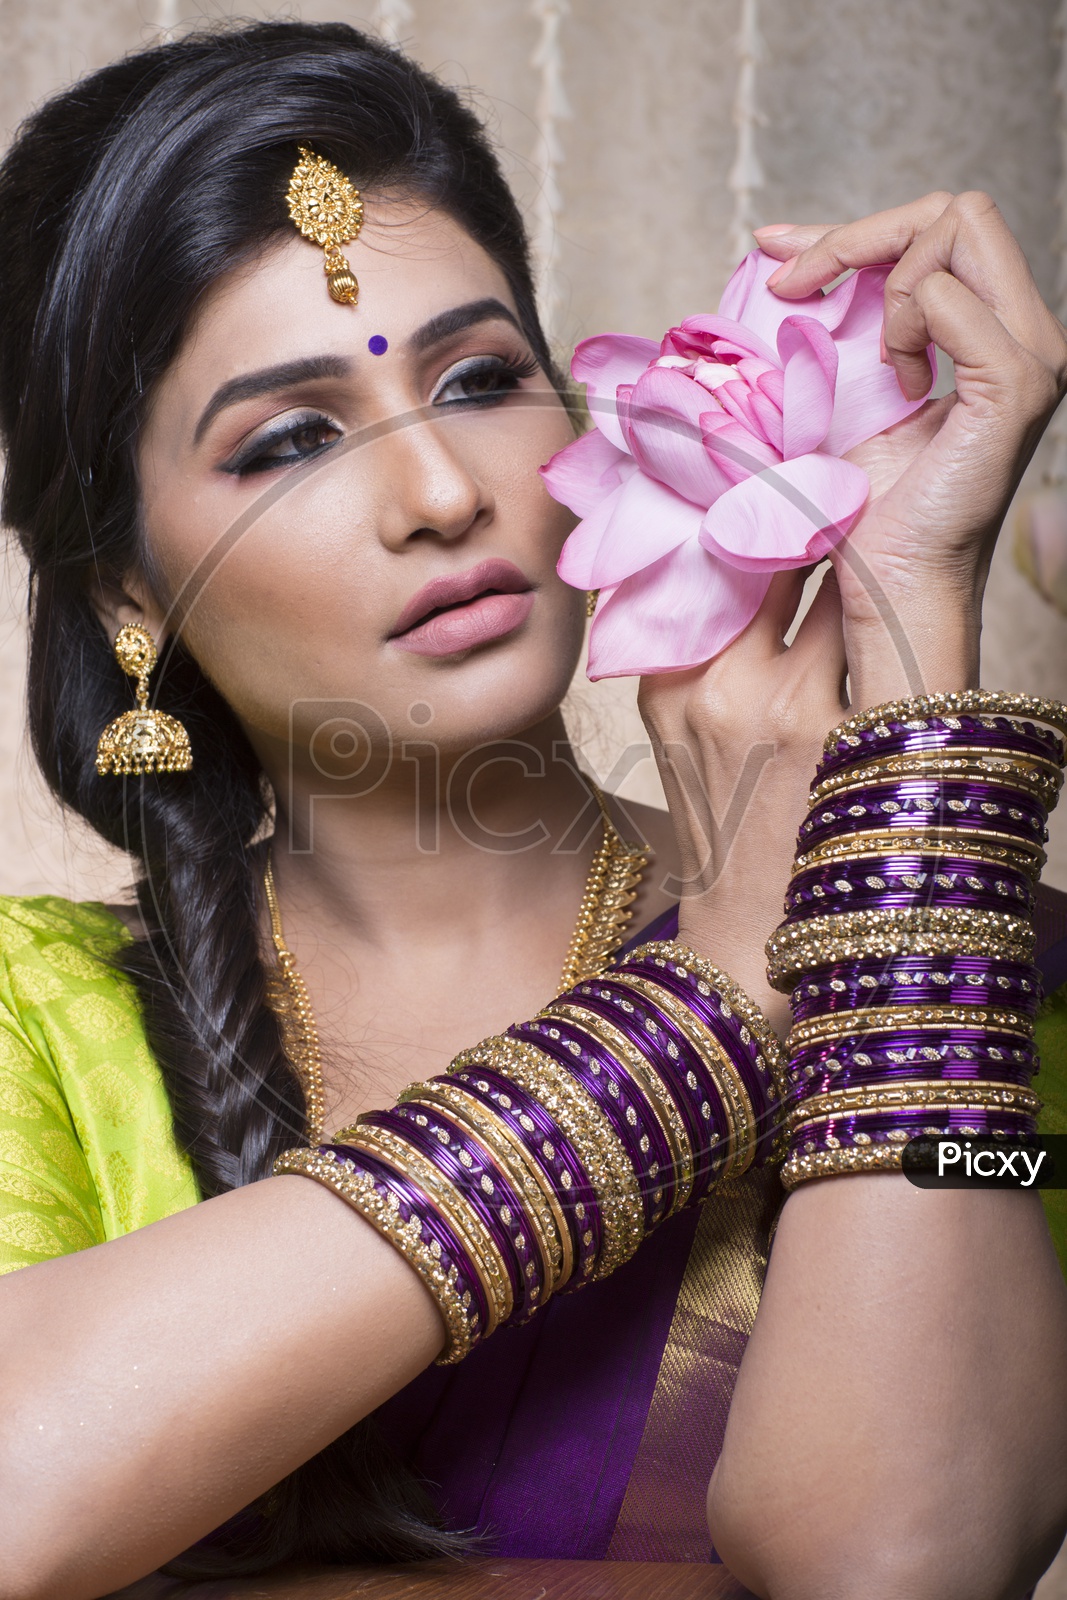 Traditional Indian Female/Woman Model in Purple Saree, green Blouse with a Lotus flower in hand - Smiling